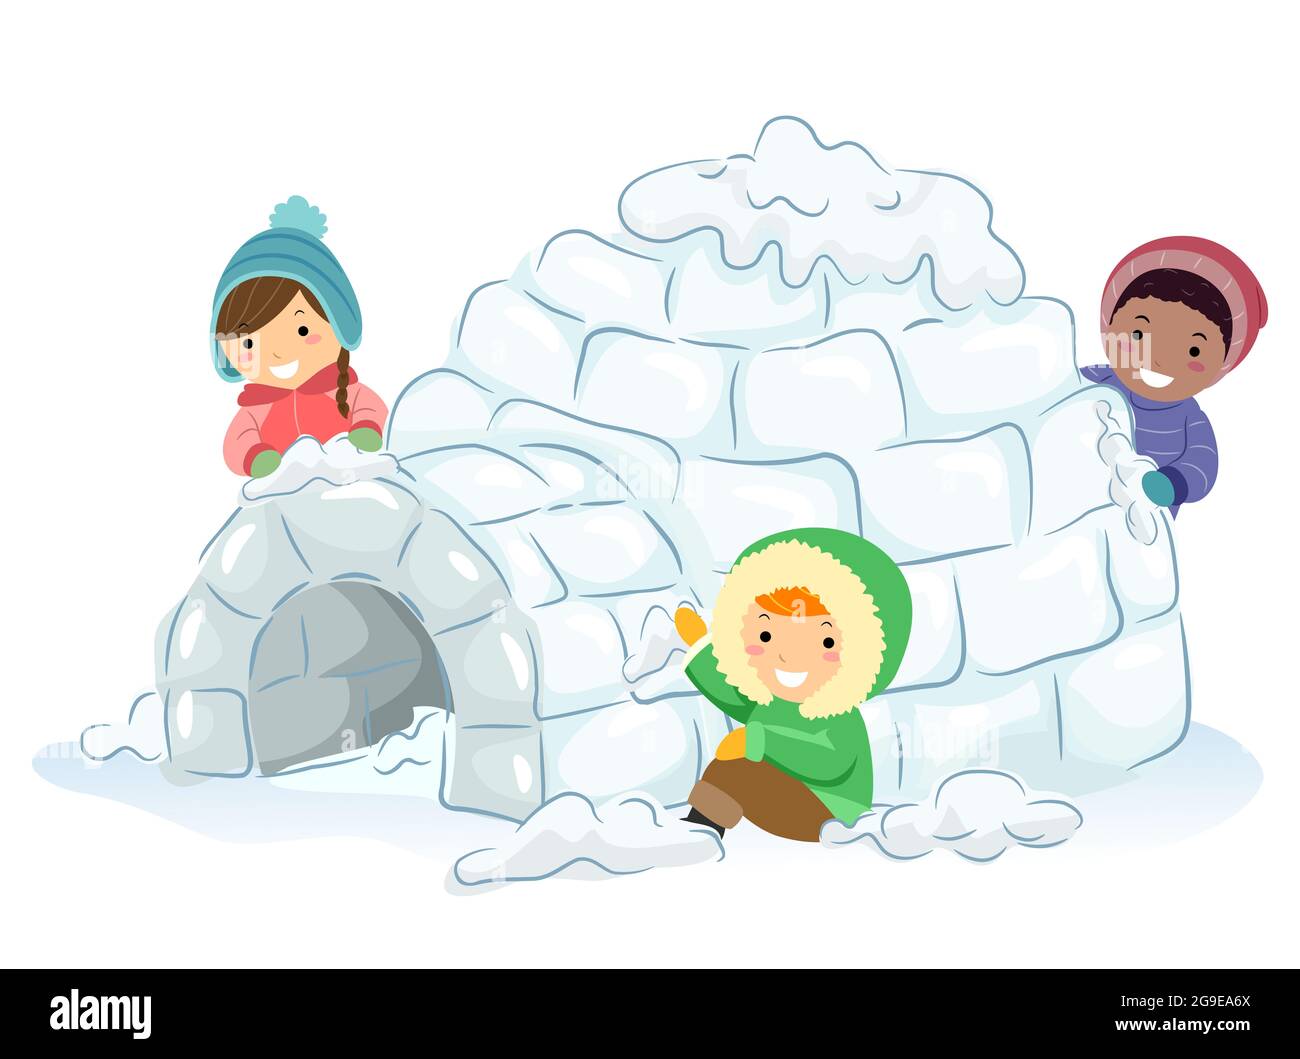 Illustration of Stickman Kids Making an Igloo, Snow Fort in the Snow Stock Photo